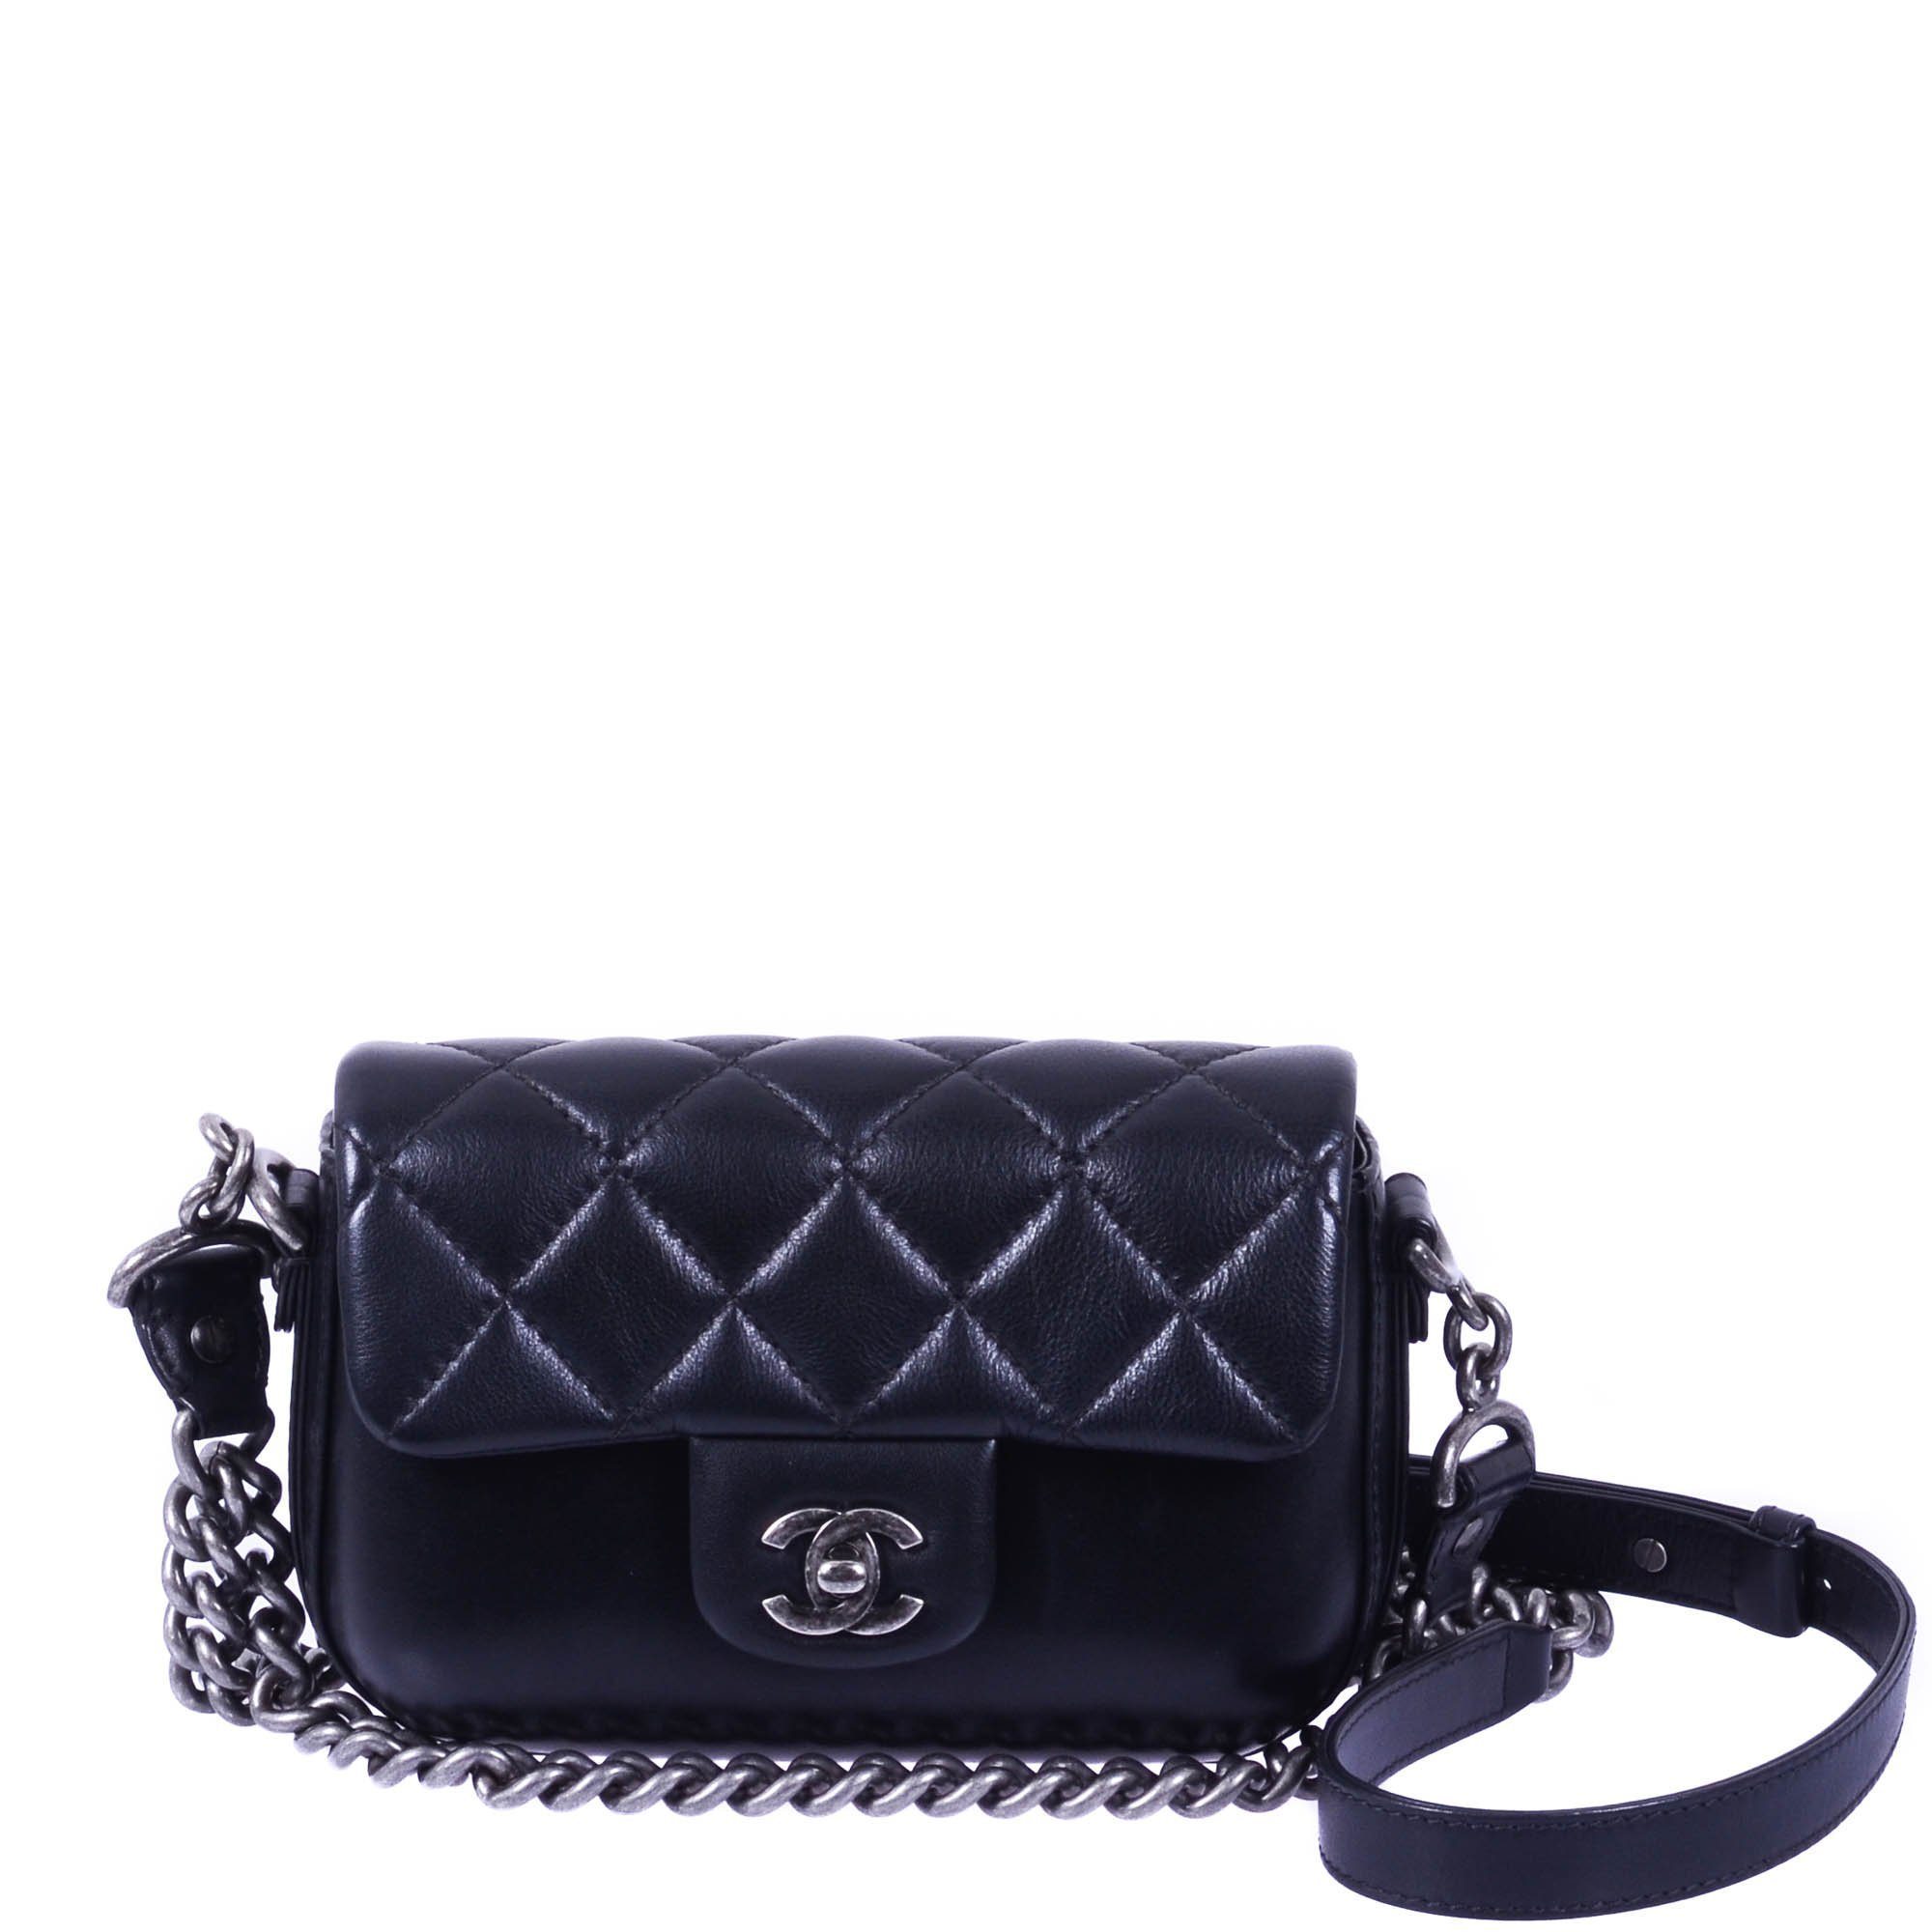 Chanel Black Quilted Leather Flap Bag Boy Chain Bag